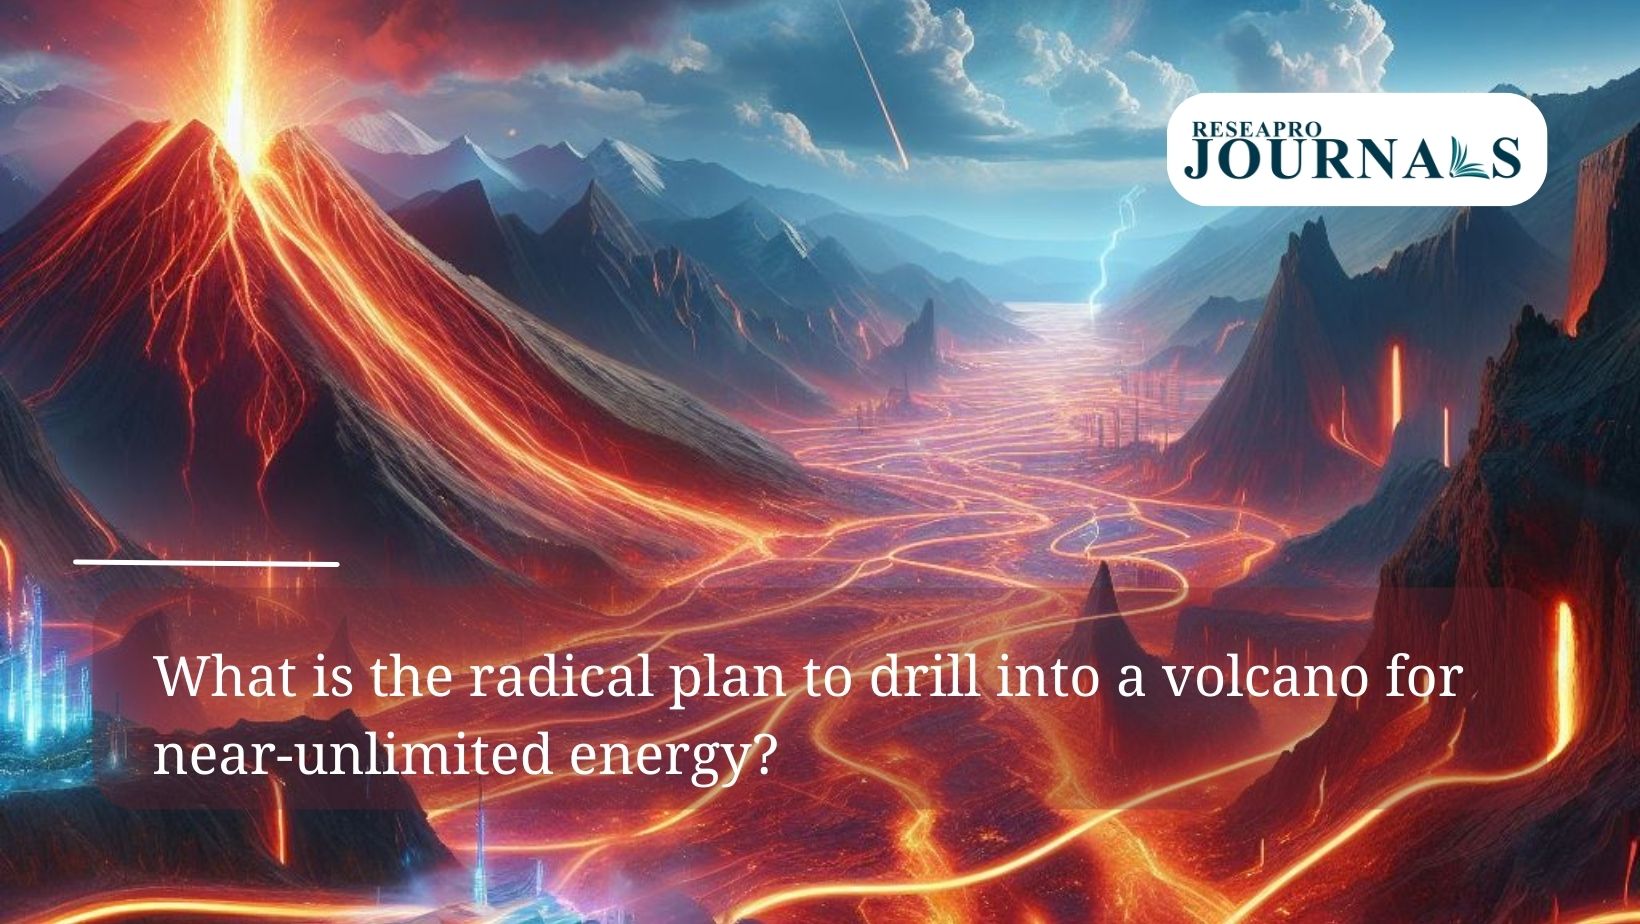 Revolutionary plan: drilling into volcanoes for limitless, sustainable geothermal energy.